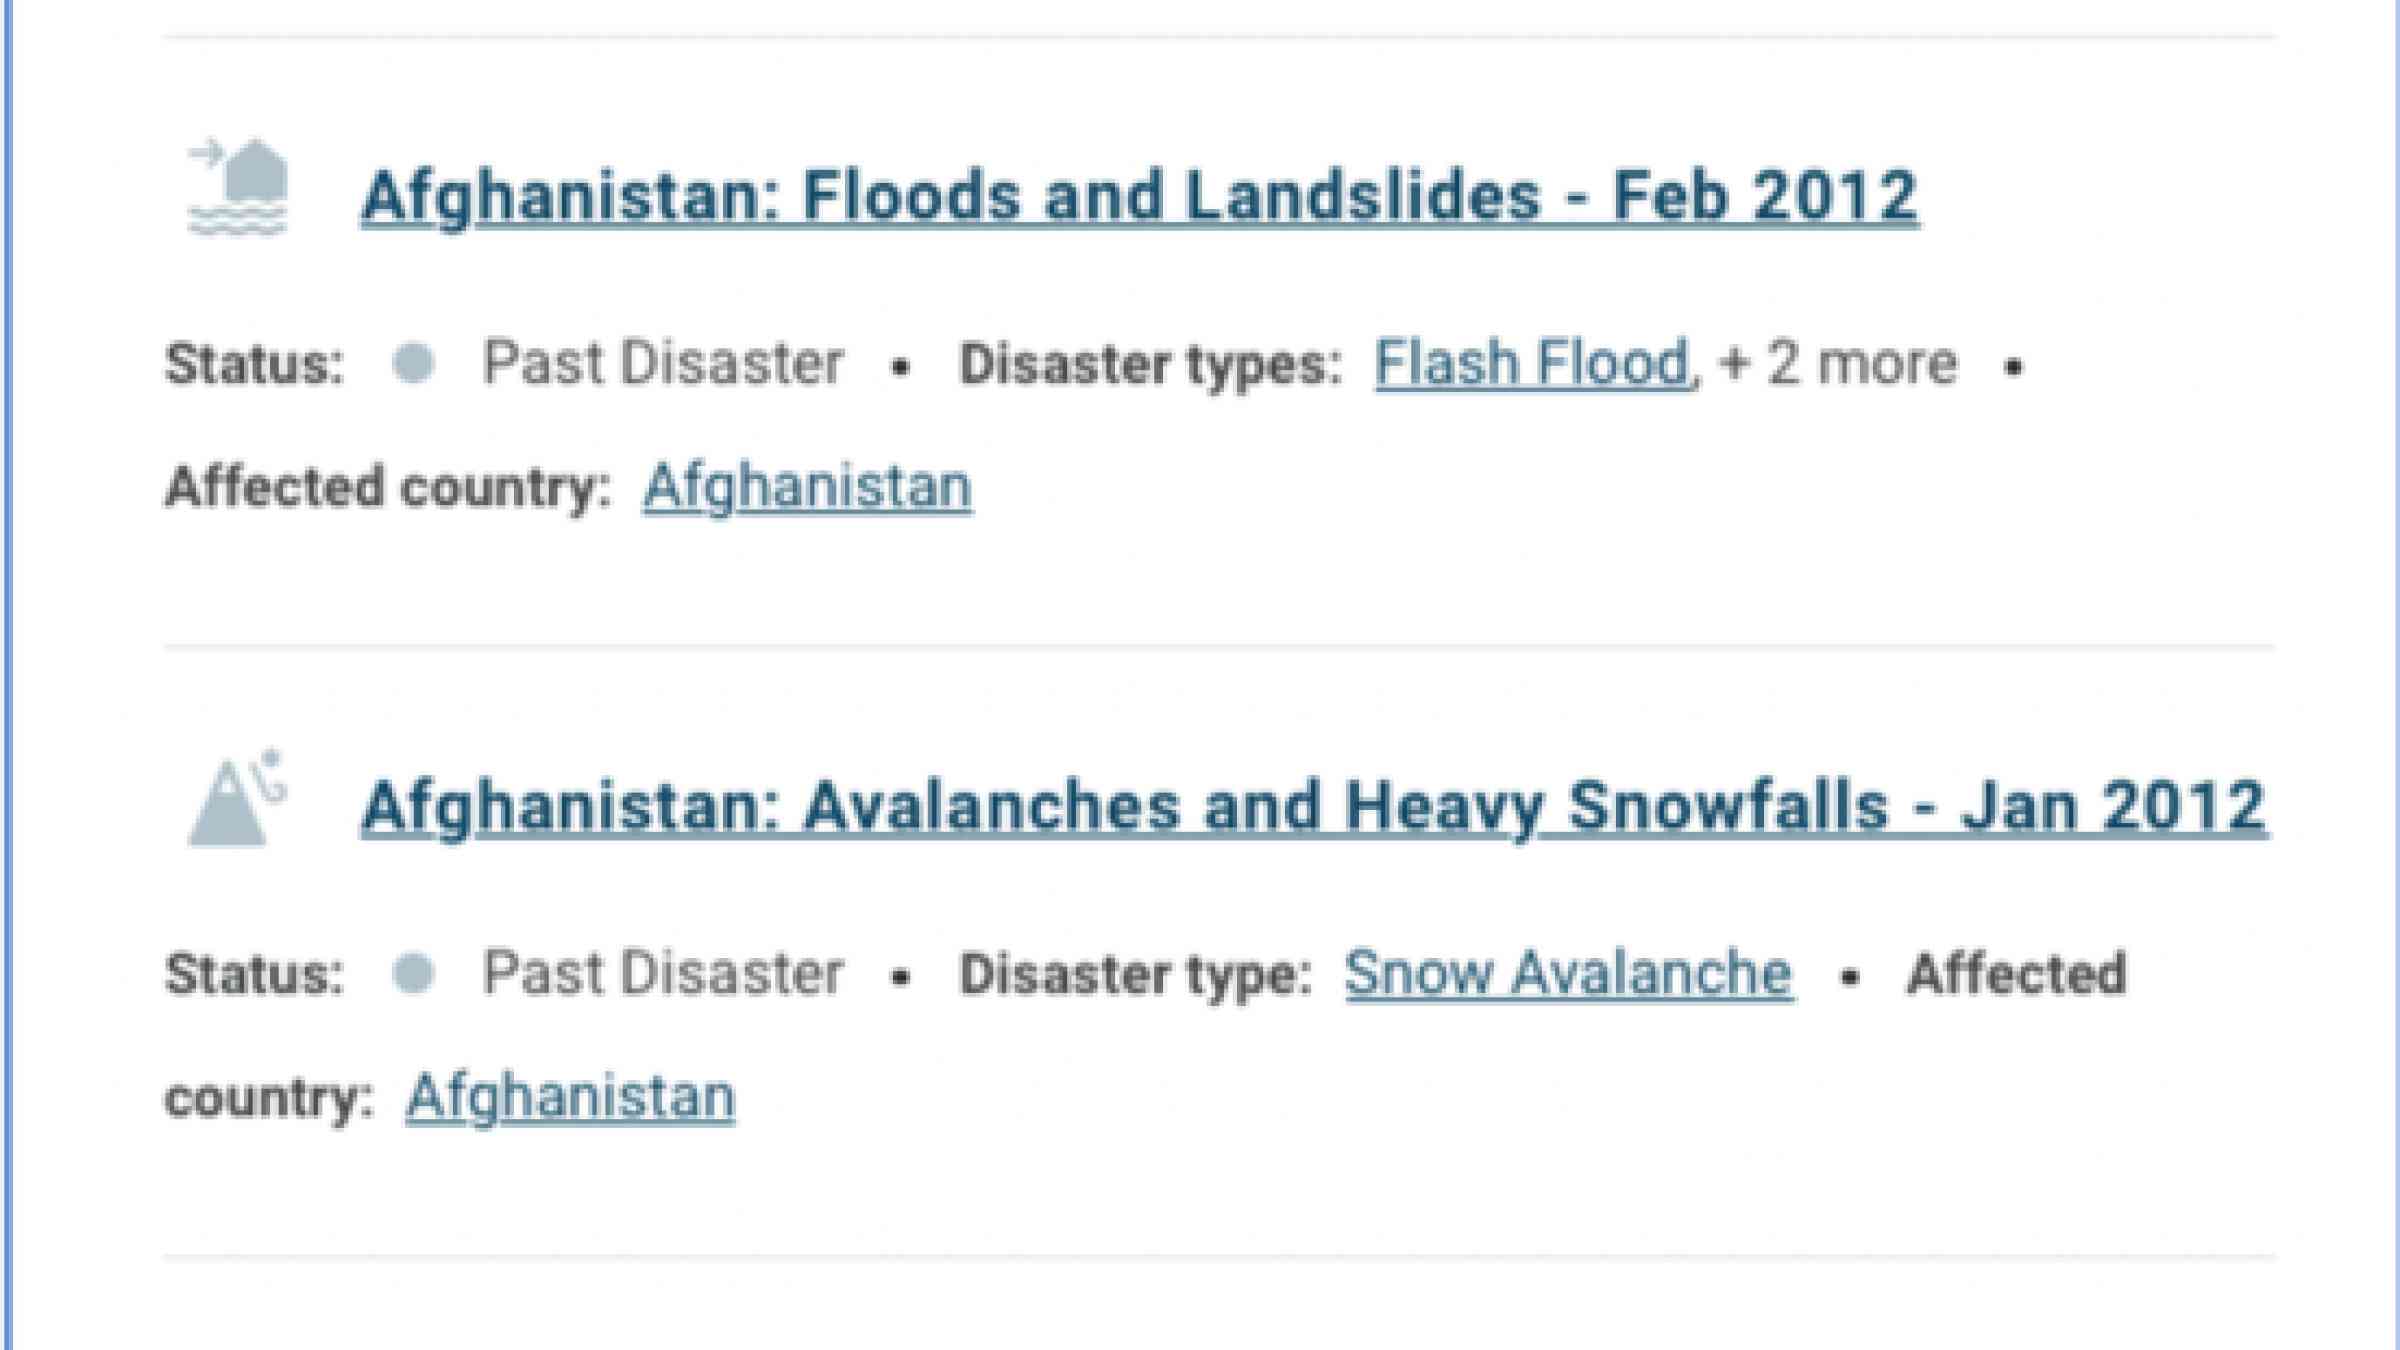 A snapshot of the disasters as reported by ReliefWeb on their website for Afghanistan early 2012 